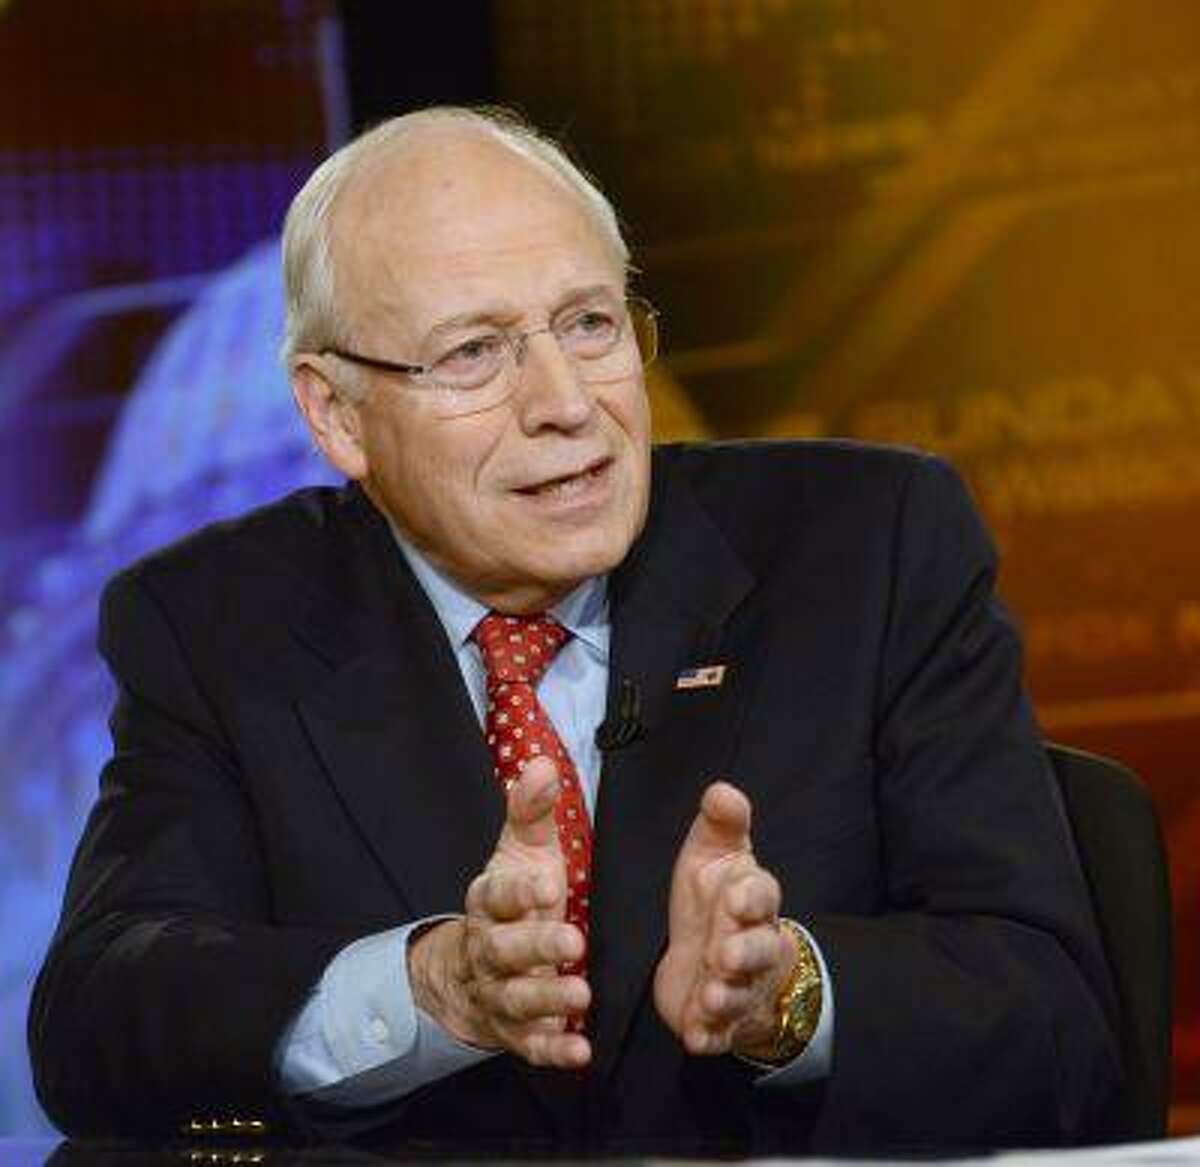 RETRANSMITTING TO ADD NAME OF PHOTOGRAPHER - In this photo released by Fox News Sunday, June 16, 2013, former Vice President Dick Cheney speaks on Fox News Sunday in Washington. Cheney says his health is "nothing short of a miracle." After his heart transplant in 2012 at age 71, Cheney says he wakes up each morning "with a smile on my face, thankful for the gift of another day I never expected to see." (AP Photo/Fox News Sunday, Fred Watkins)